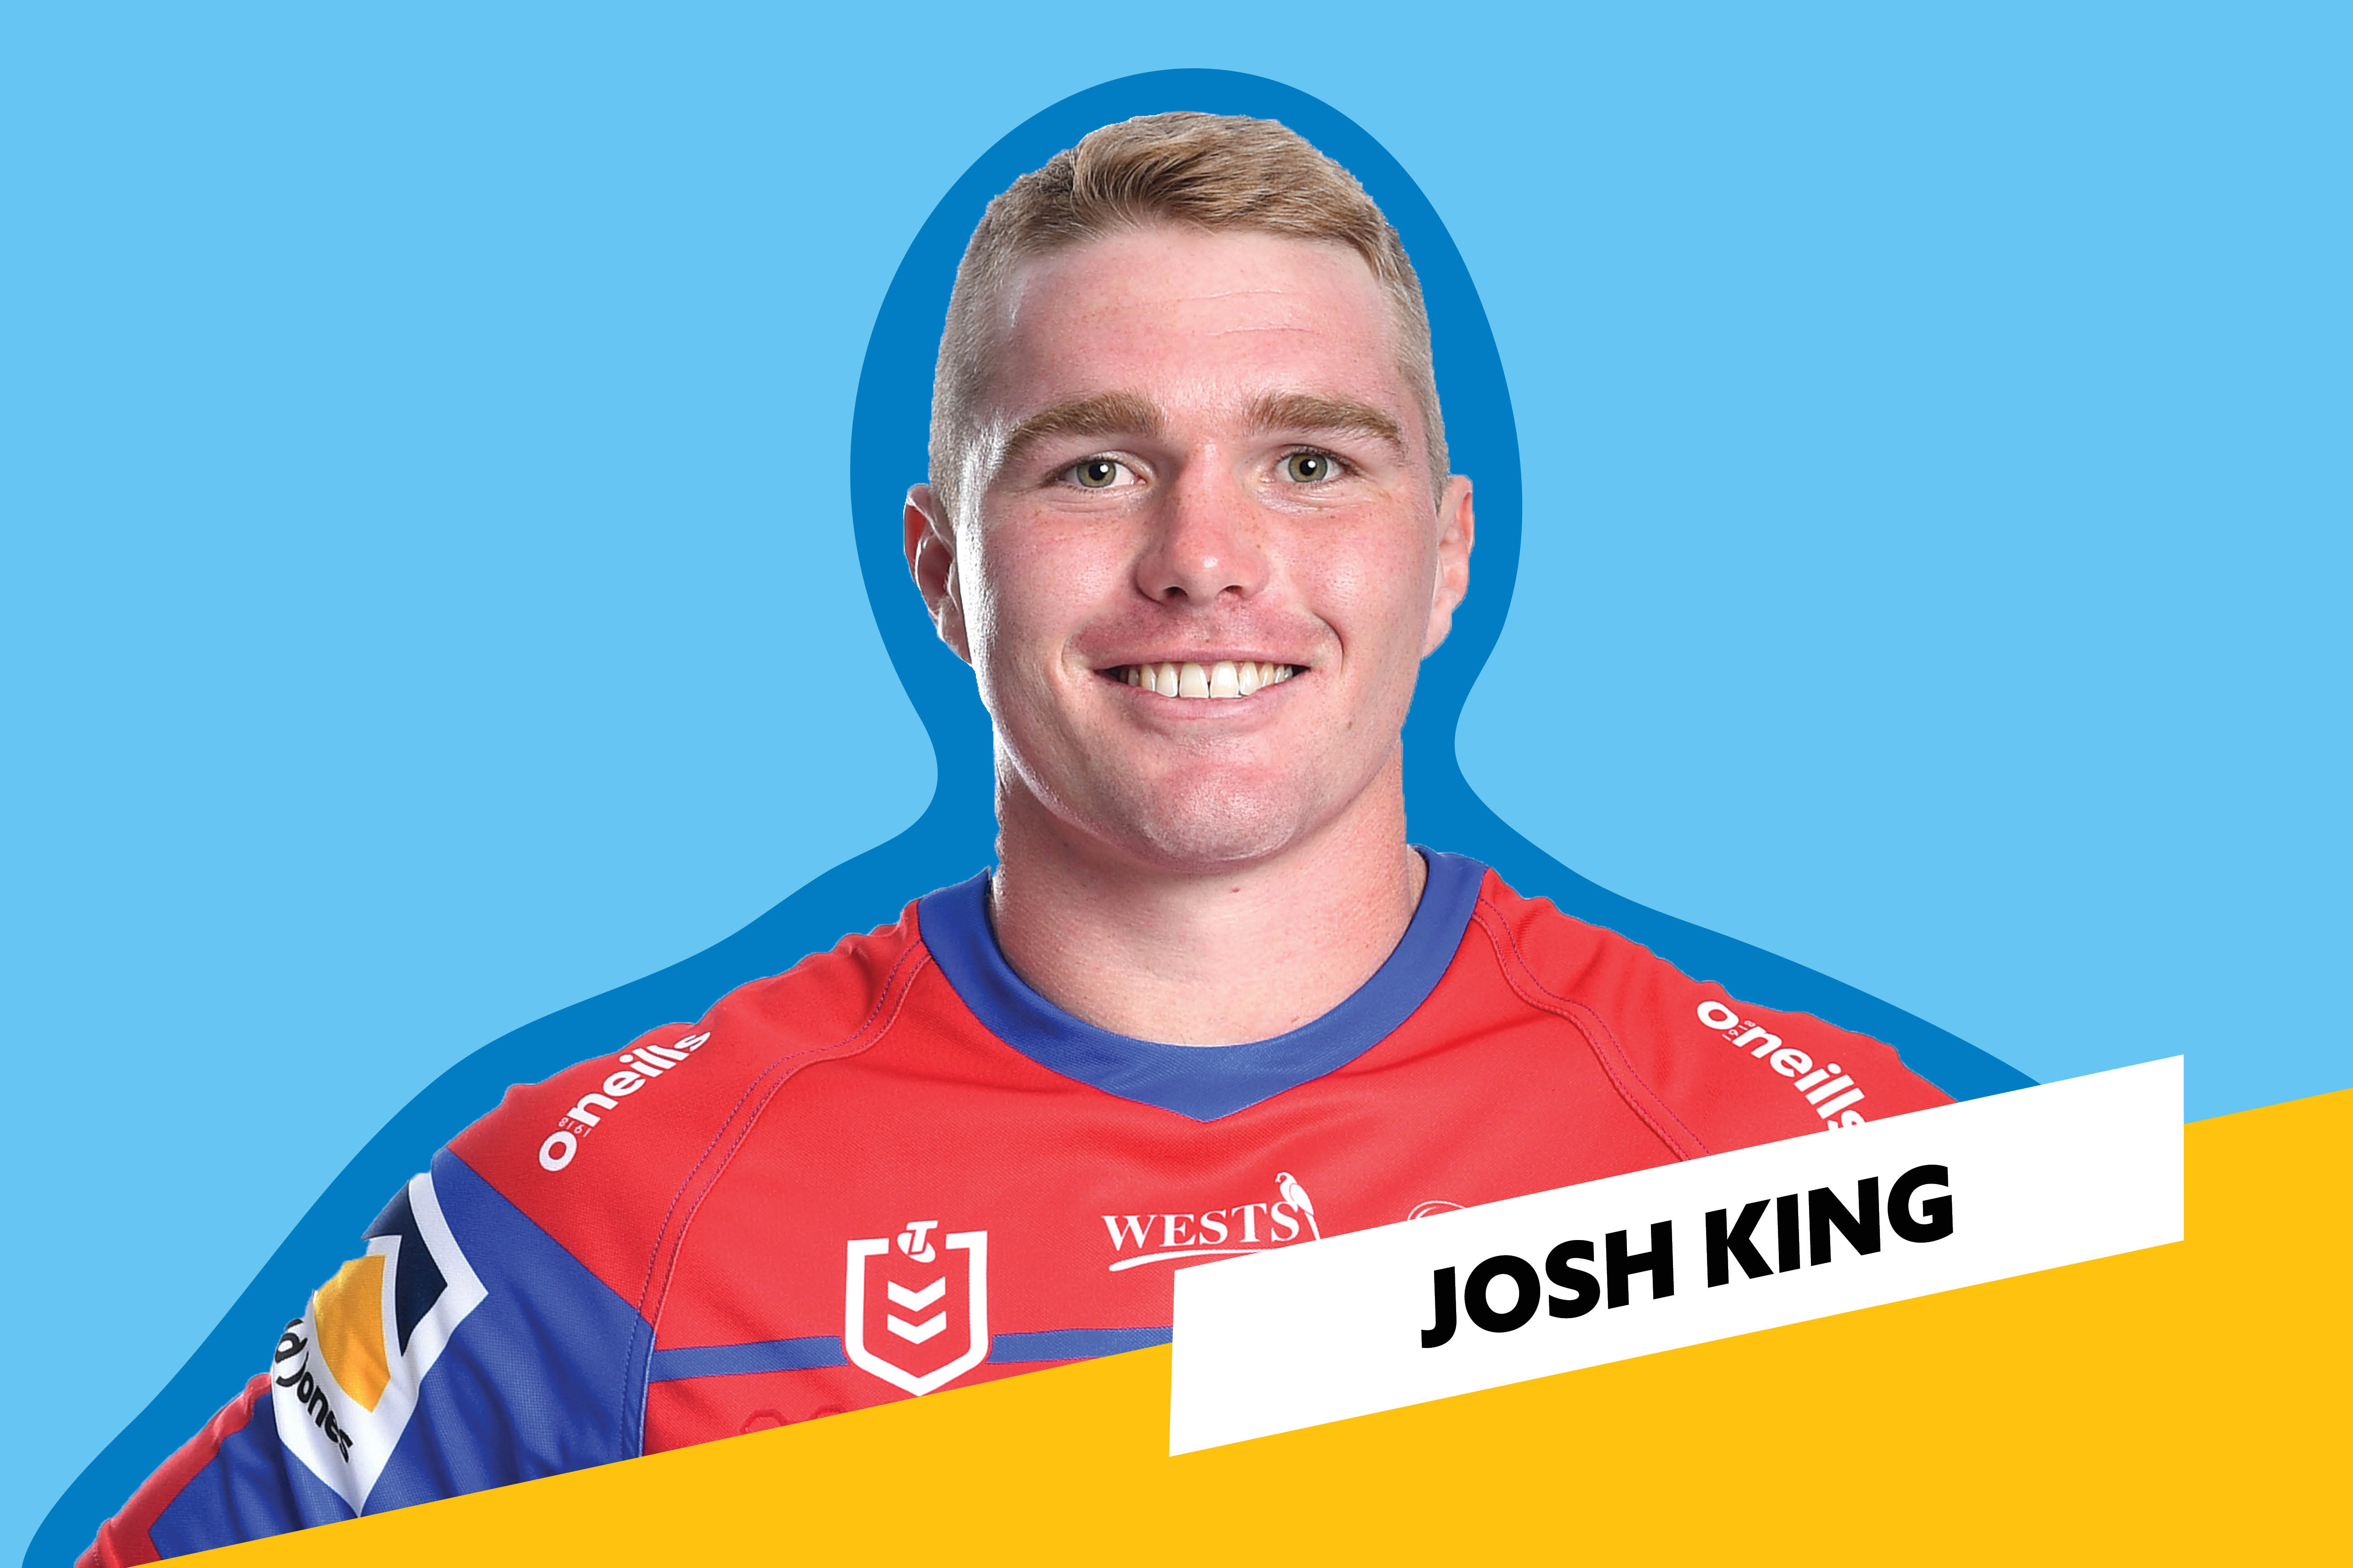 Apprenticeship Careers Australia - Playing In All Conditions - Josh King